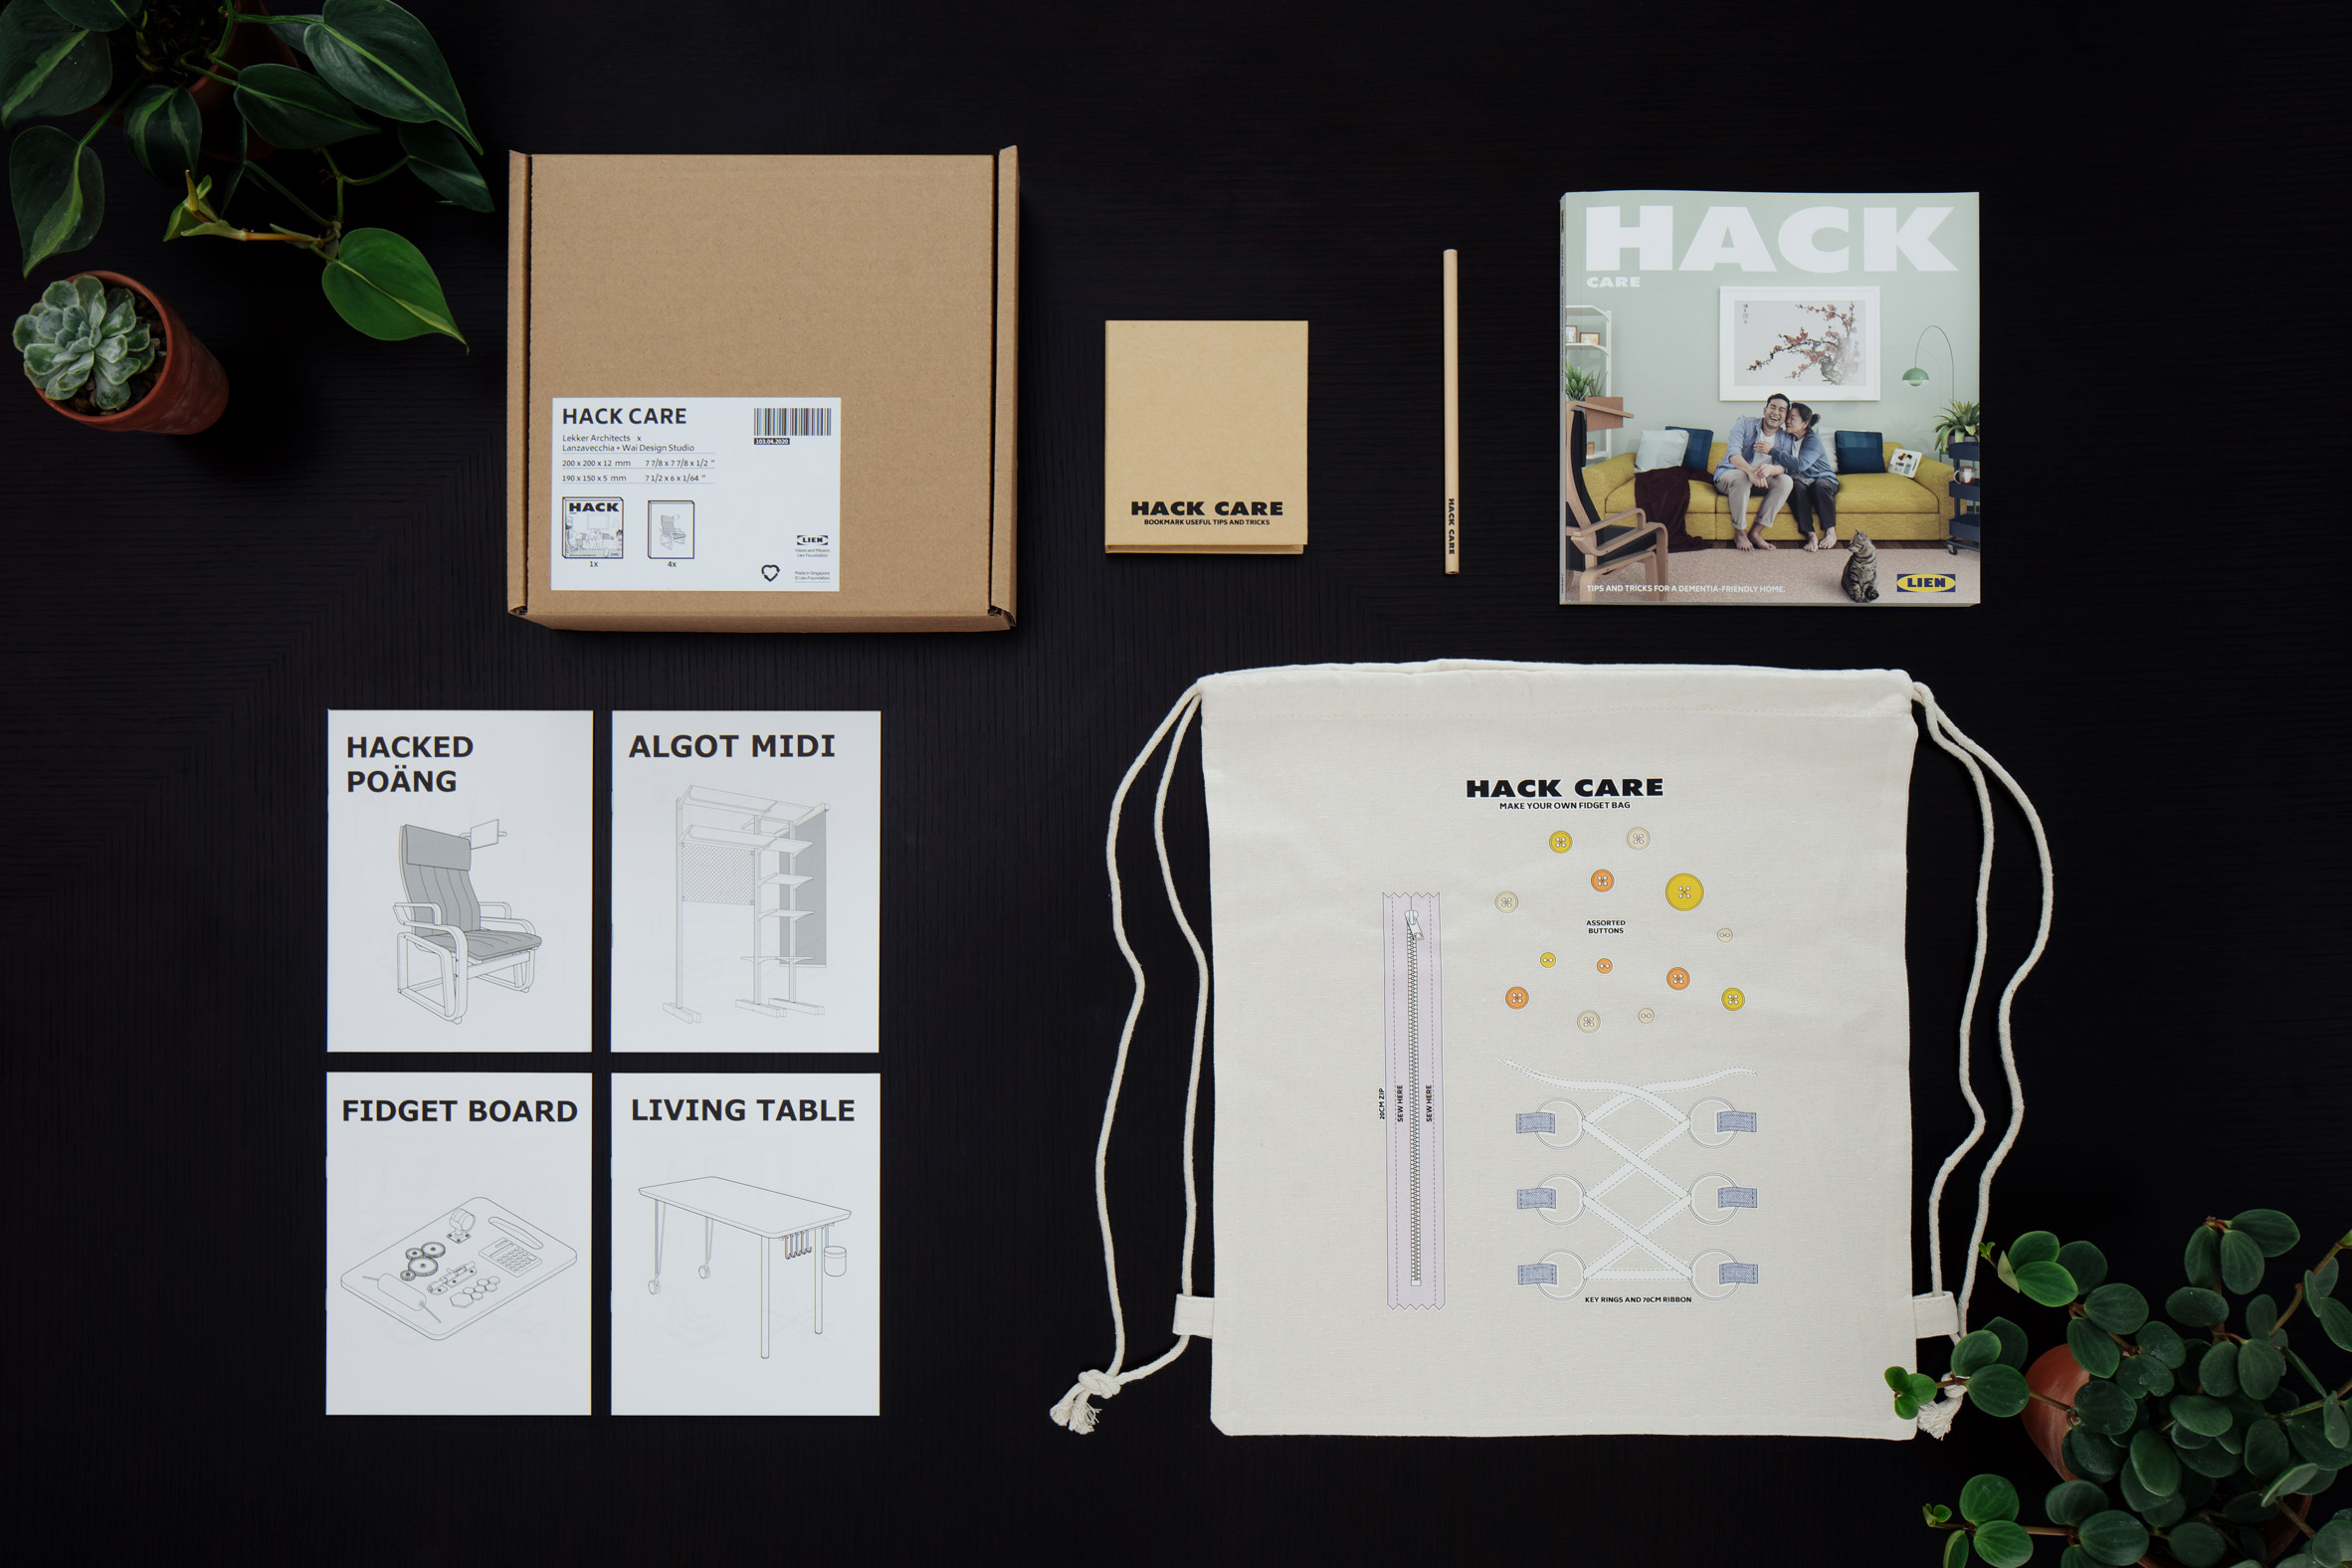 Hack Care book and kit by Lekker Architects, Lanzavecchia + Wai and the Lien Foundation